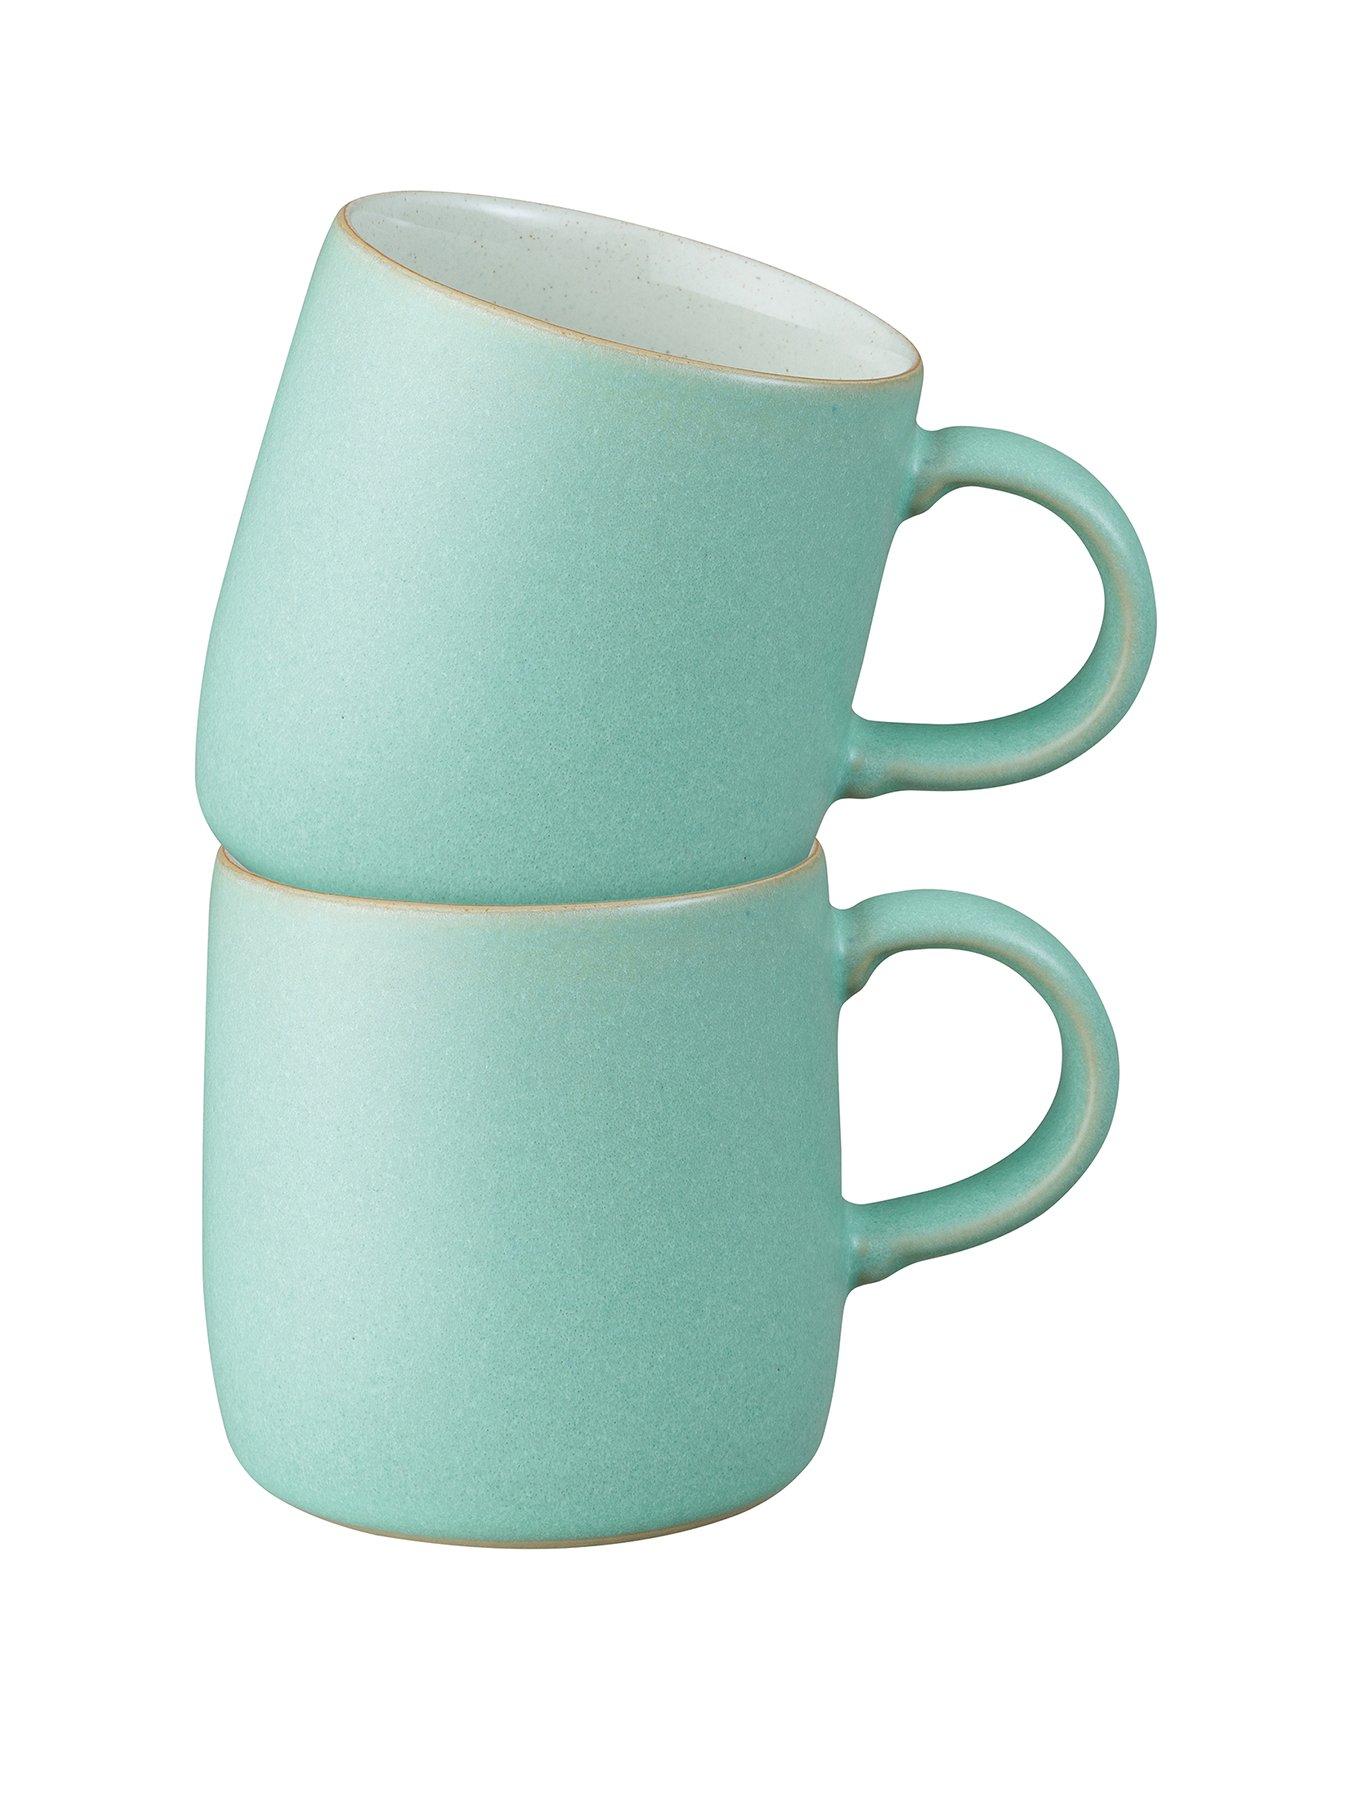 22 Oz Large Ceramic Coffee Mug, Big Jumbo Tea Cup for Office and Home,  Dishwasher and Microwave Safe (Mint Green)